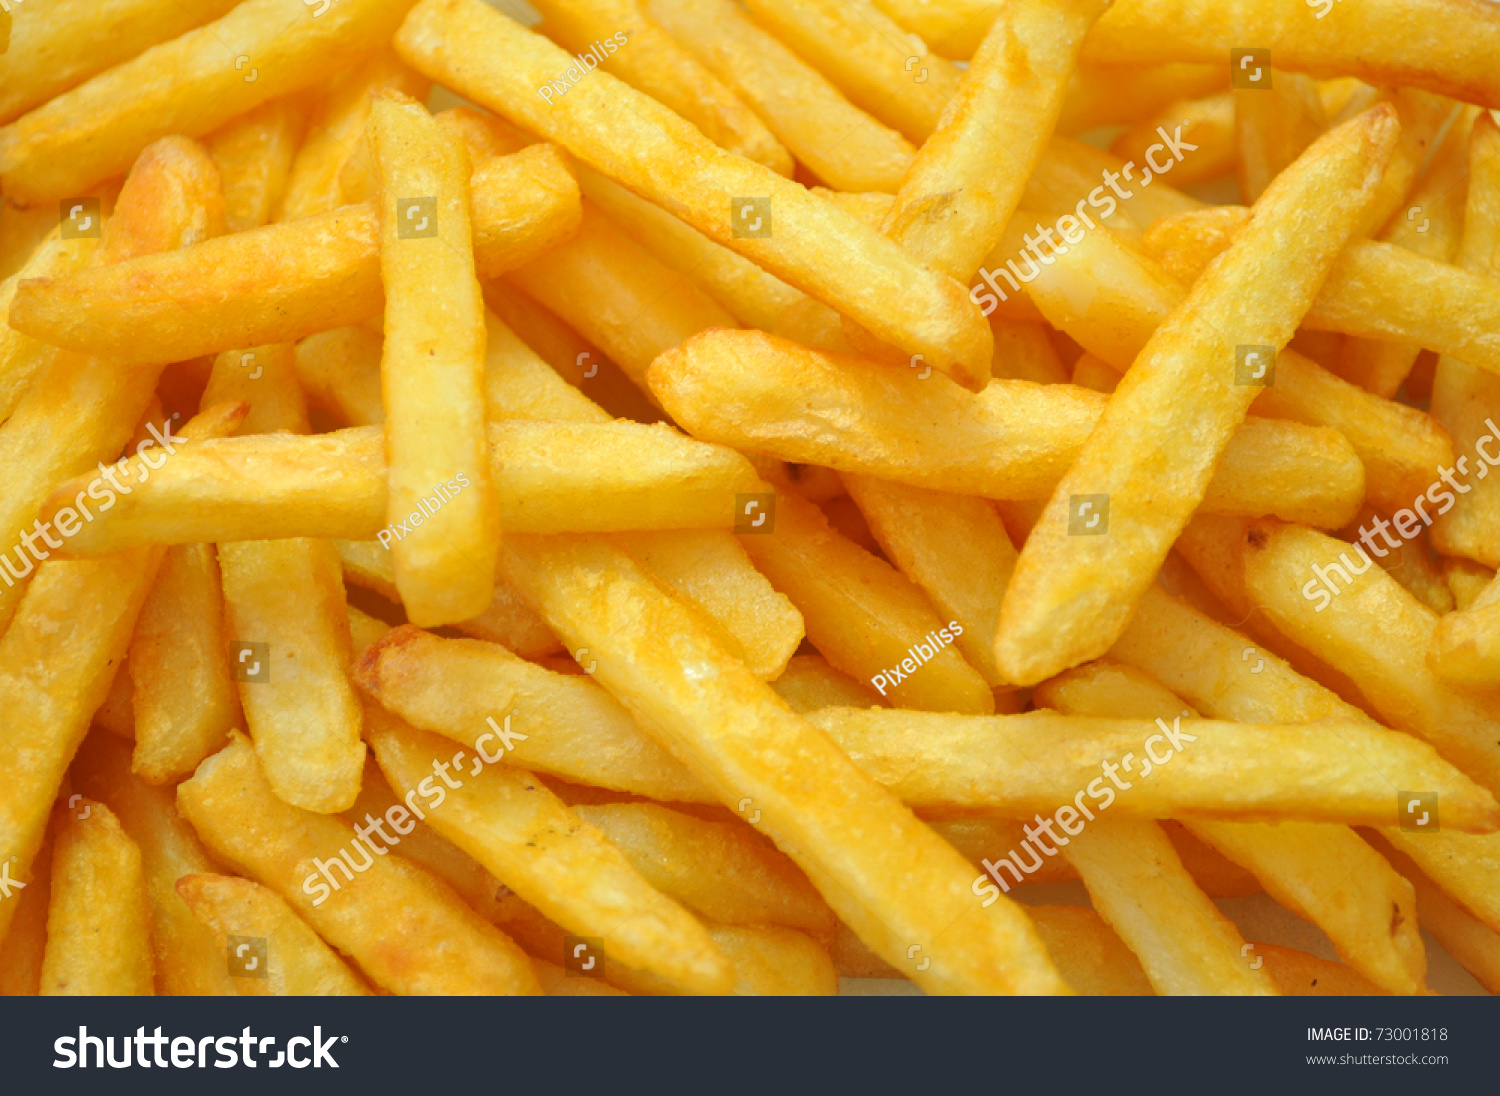 French Fries Stock Photo 73001818 - Shutterstock